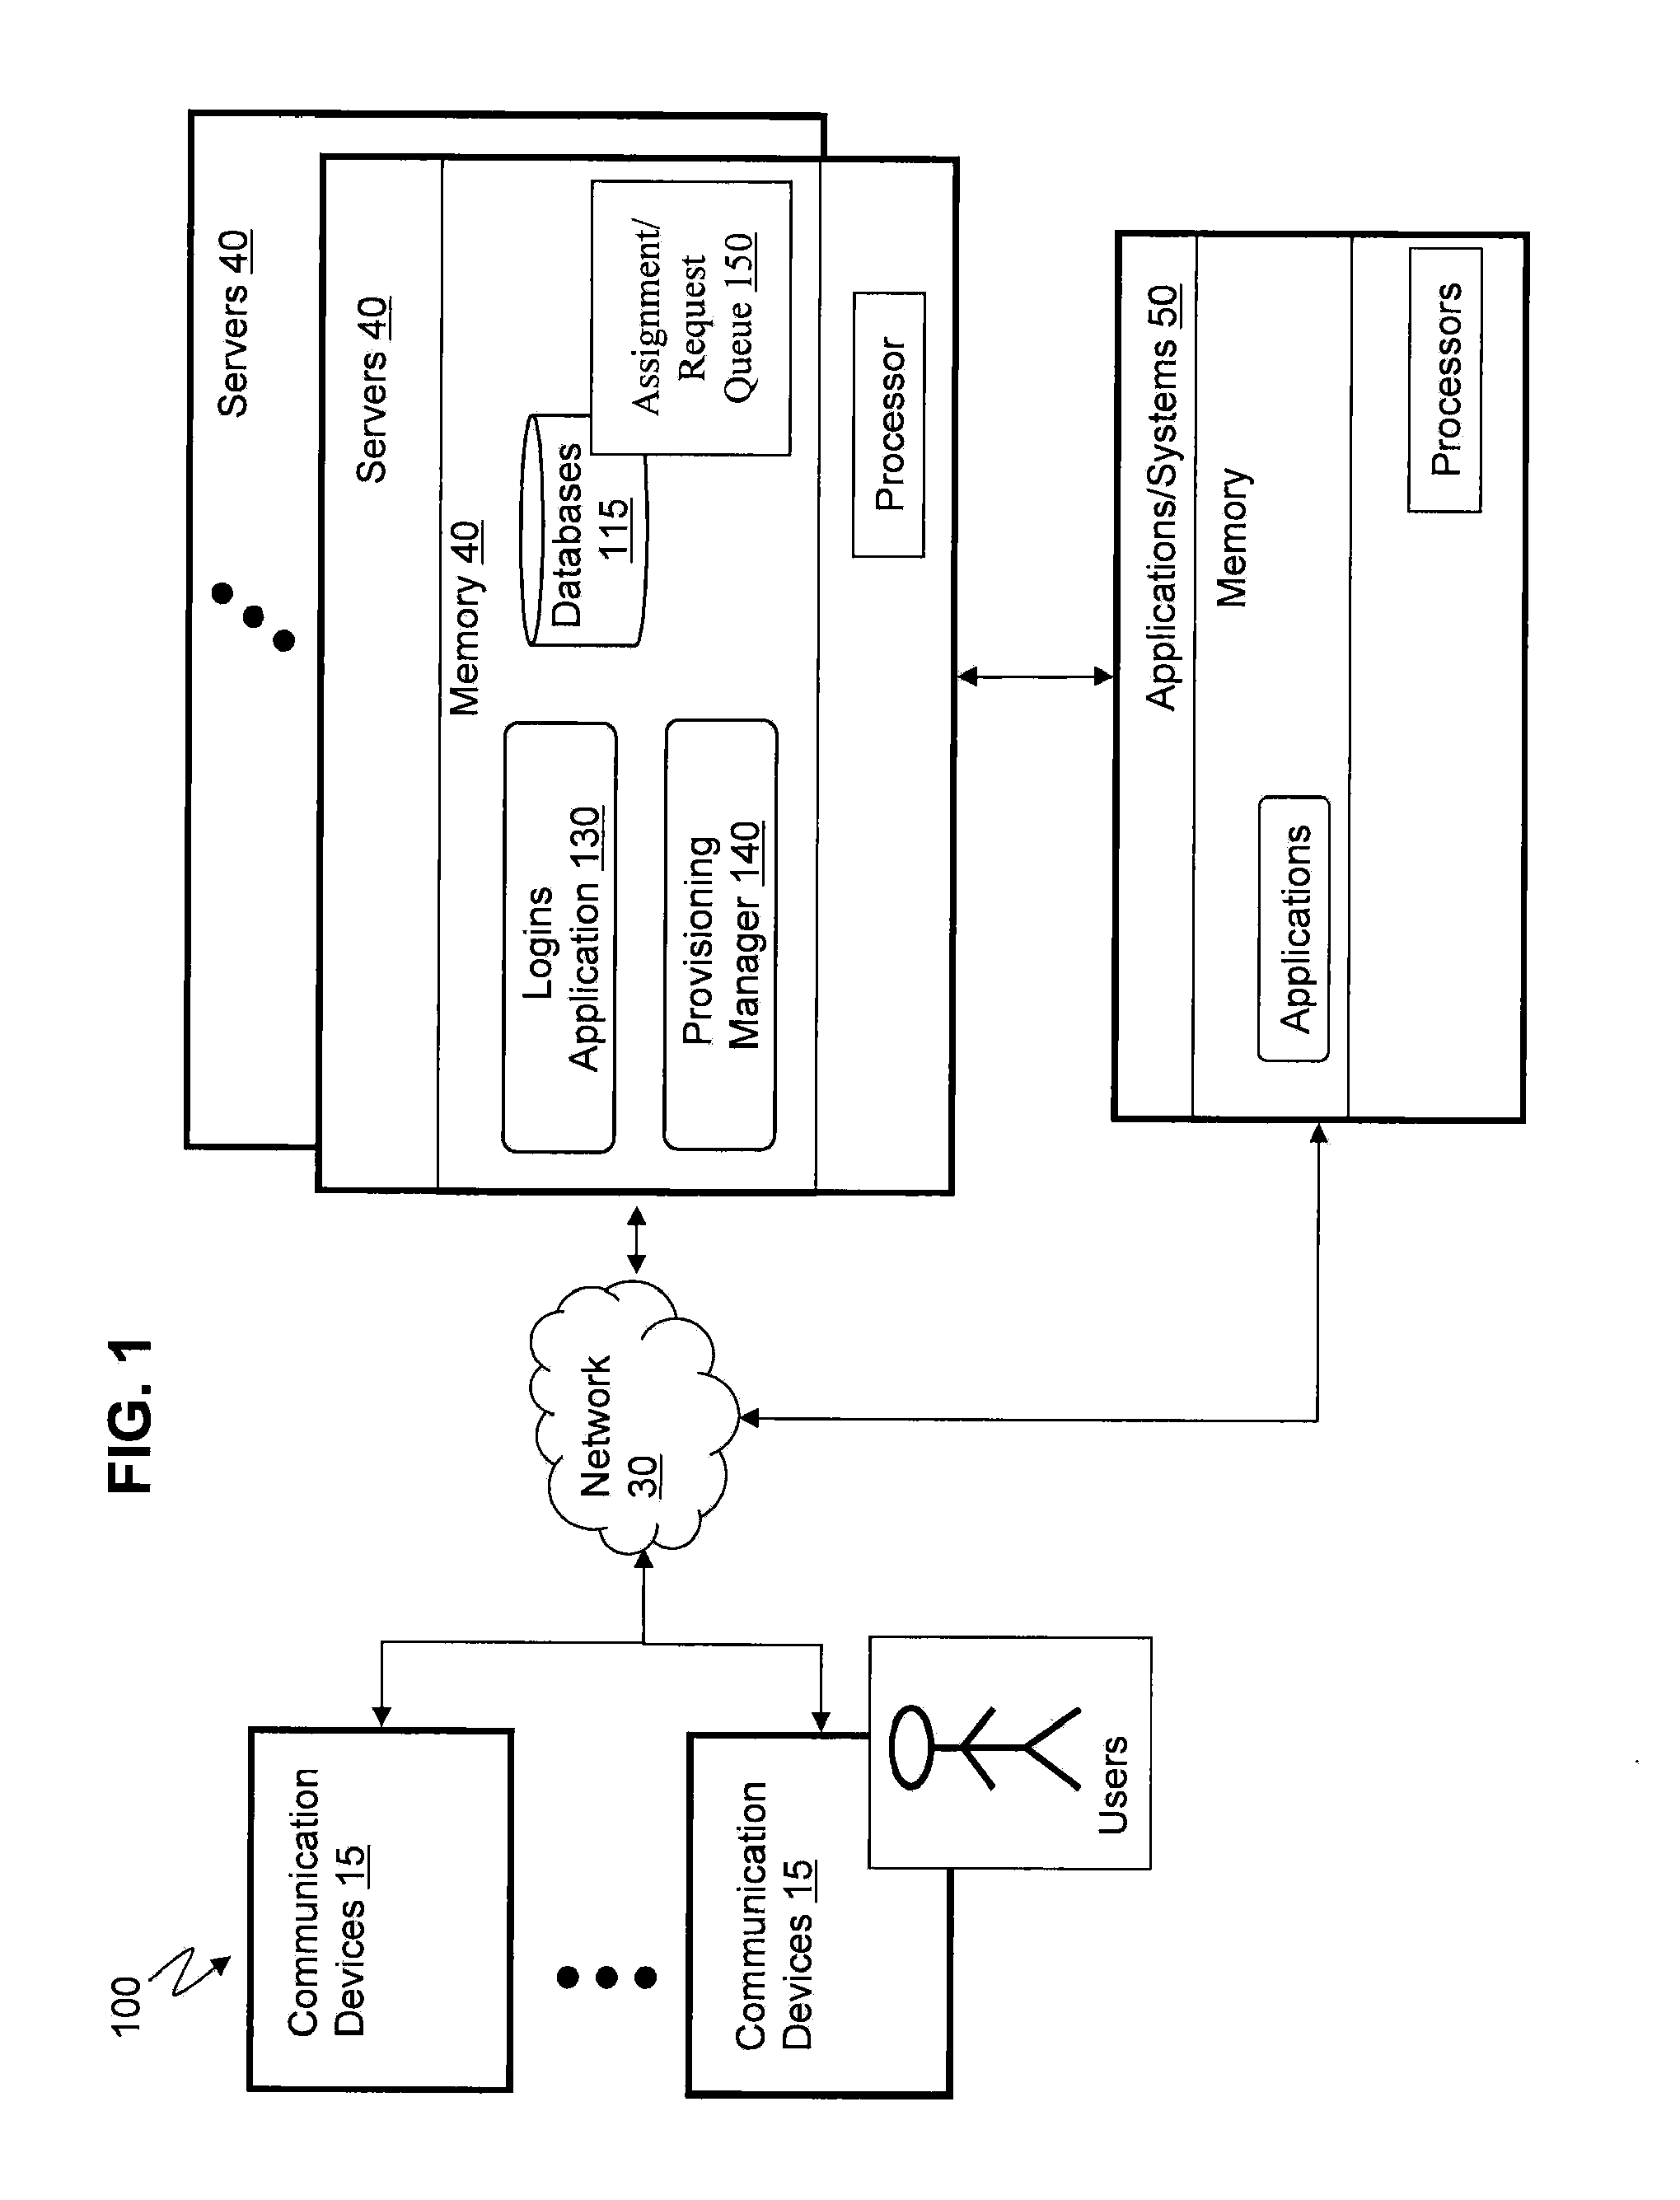 Method, apparatus, and computer product for centralized account provisioning